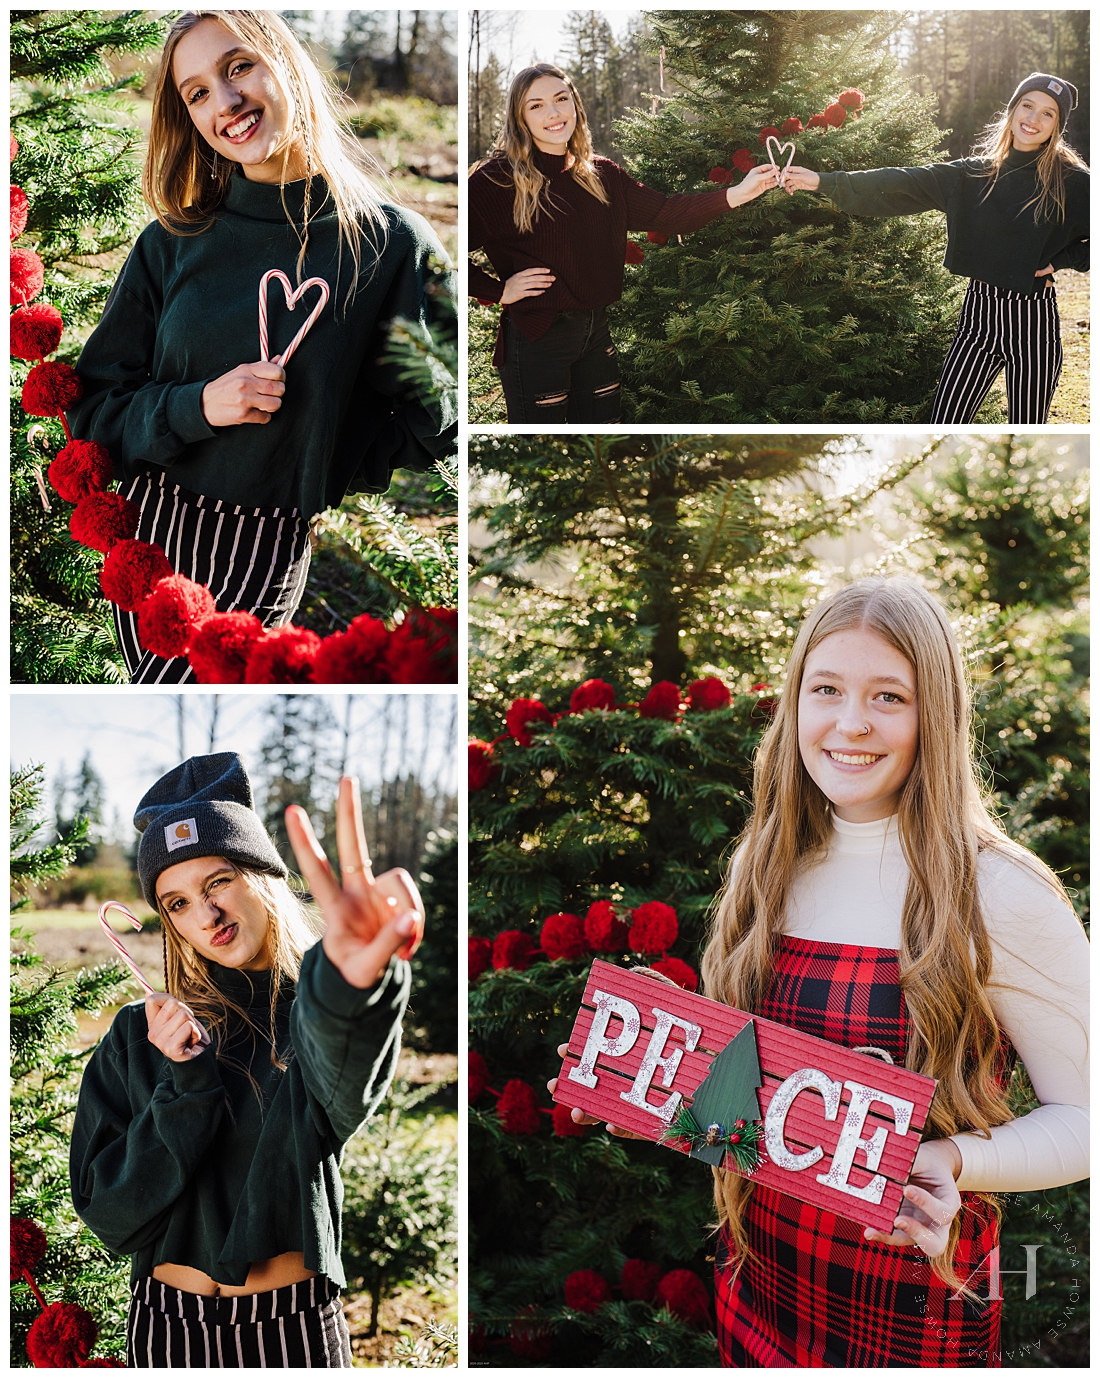 Styled Holiday Tree Farm Photoshoot | The AHP Model Team celebrated December with a fun trip to a Port Orchard Tree Farm! Click the photo for more outfit inspiration. | Photographed by Tacoma Senior Portrait Photographer Amanda Howse